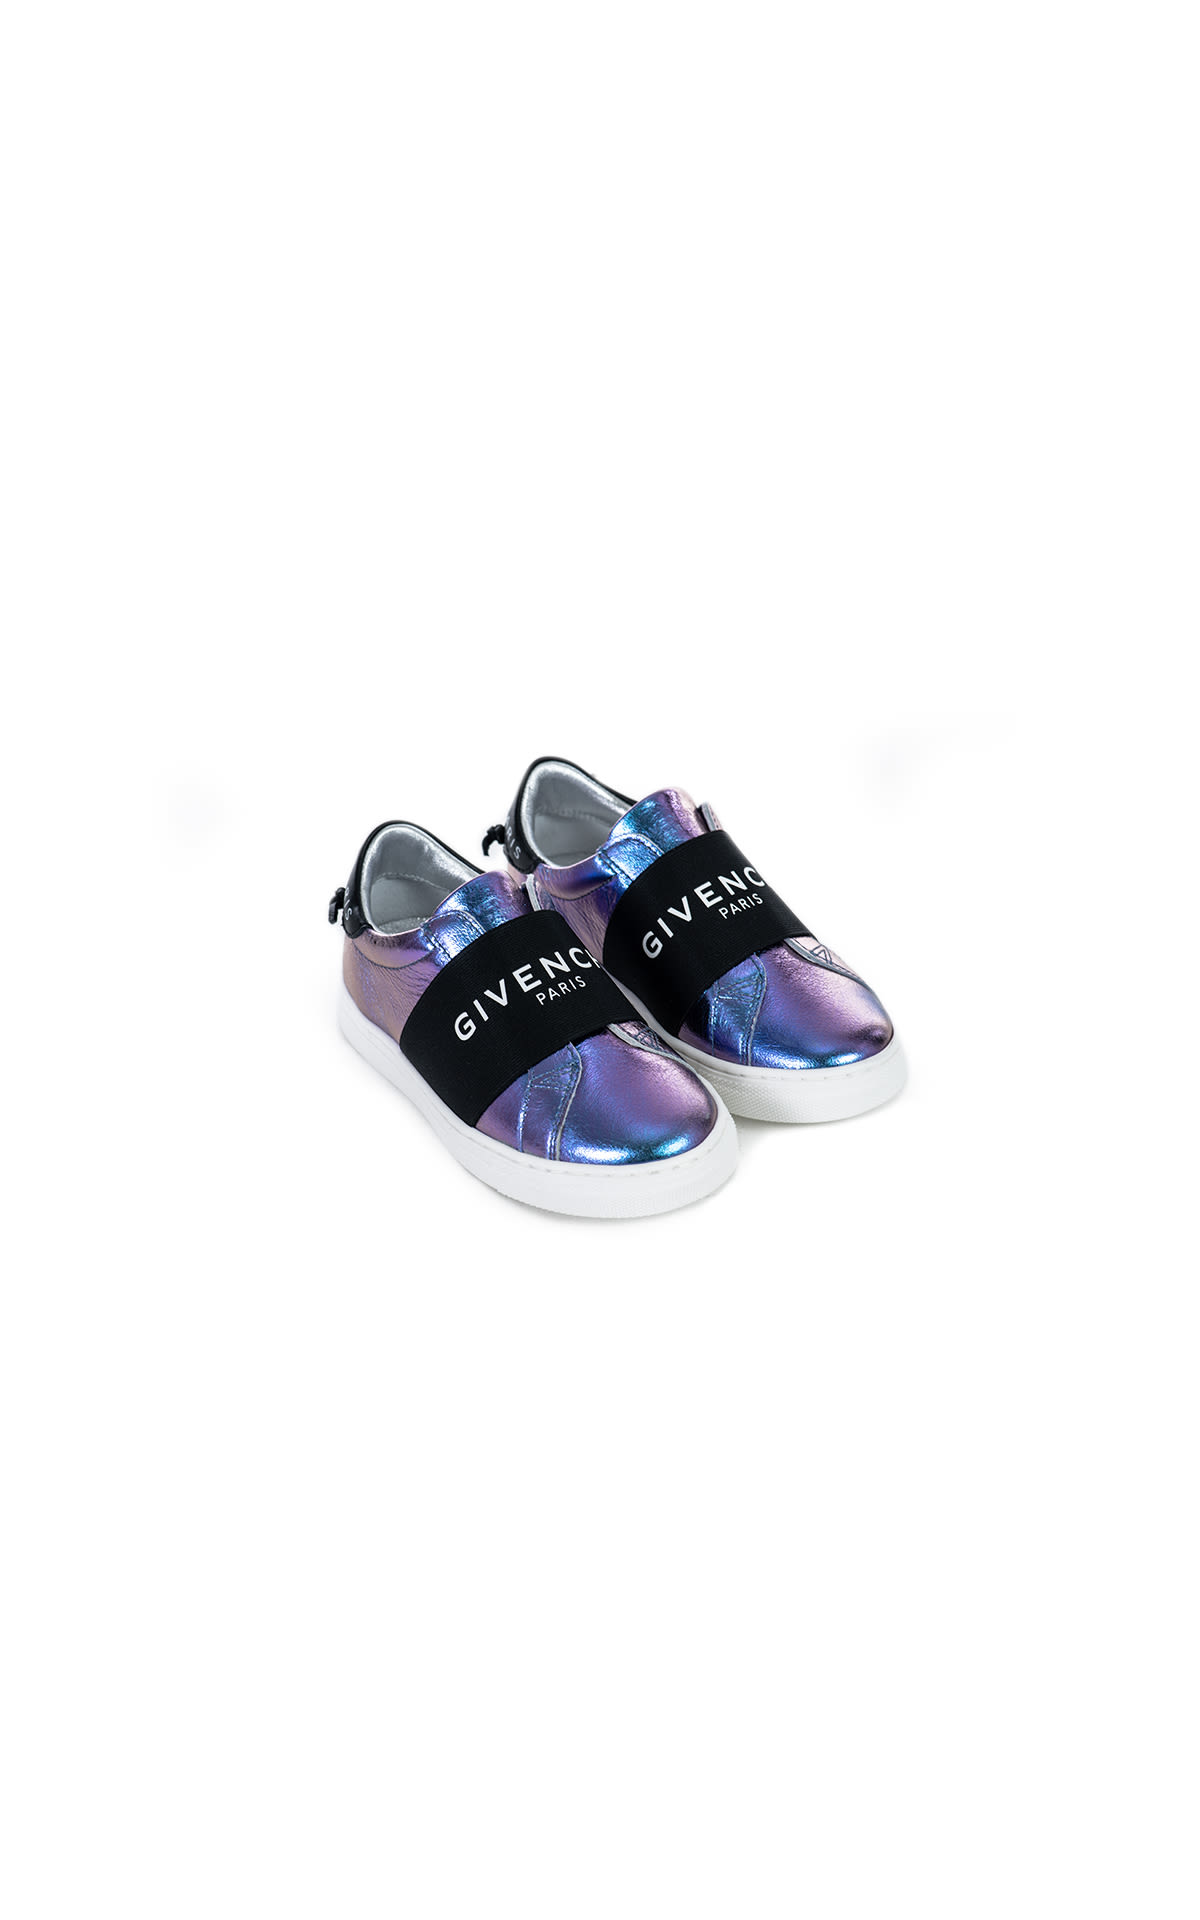 Kids Around Givenchy sneakers